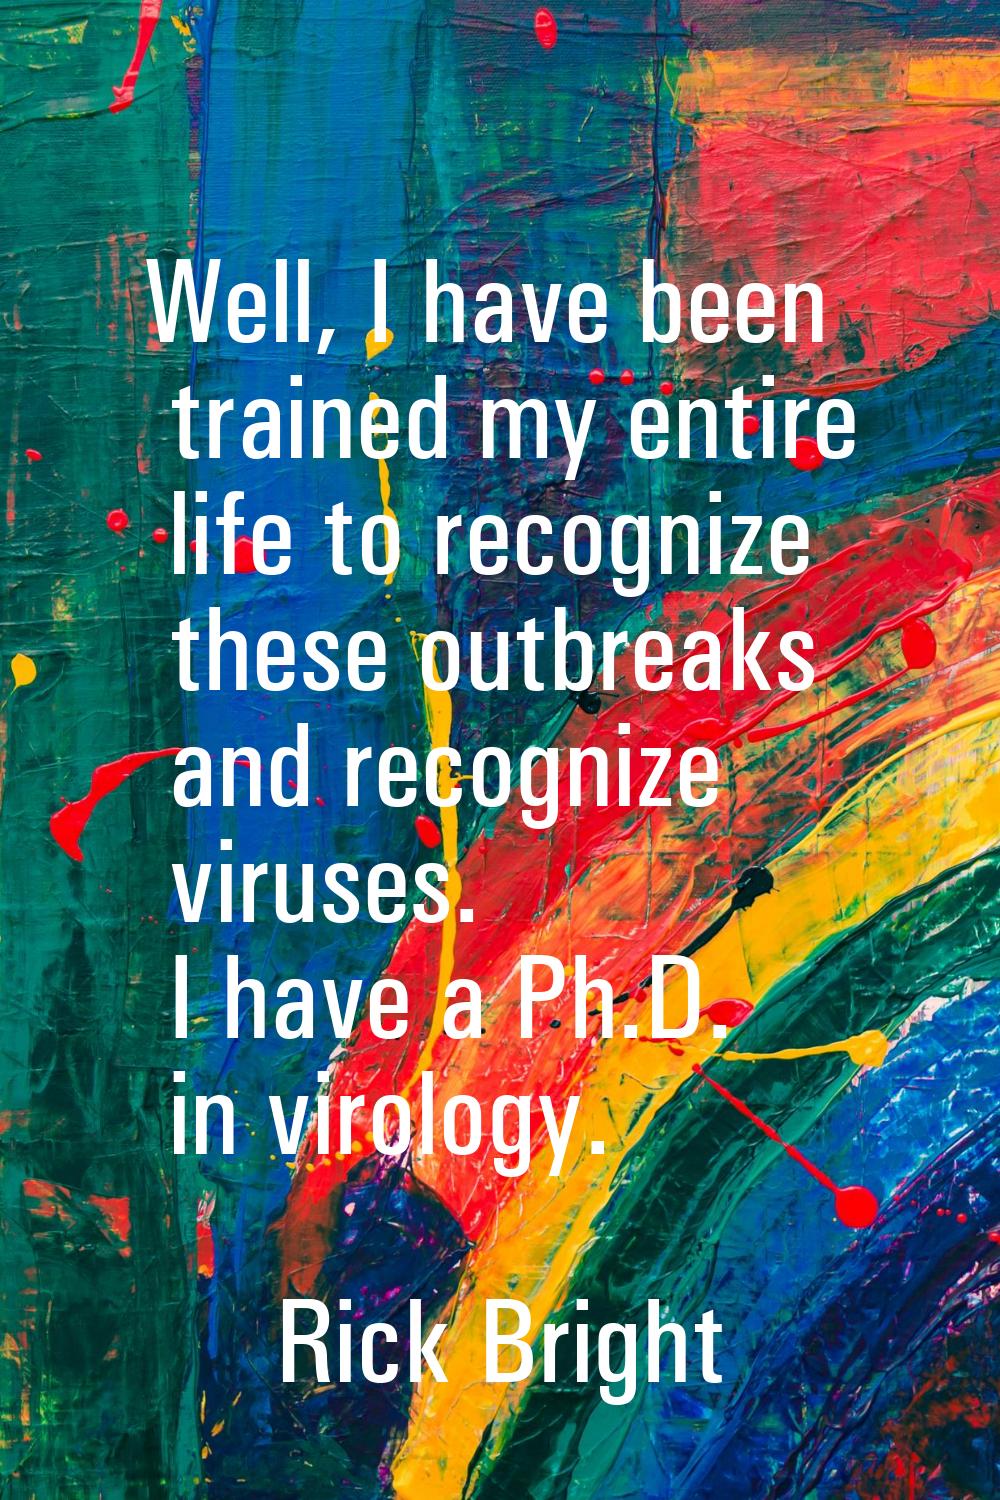 Well, I have been trained my entire life to recognize these outbreaks and recognize viruses. I have